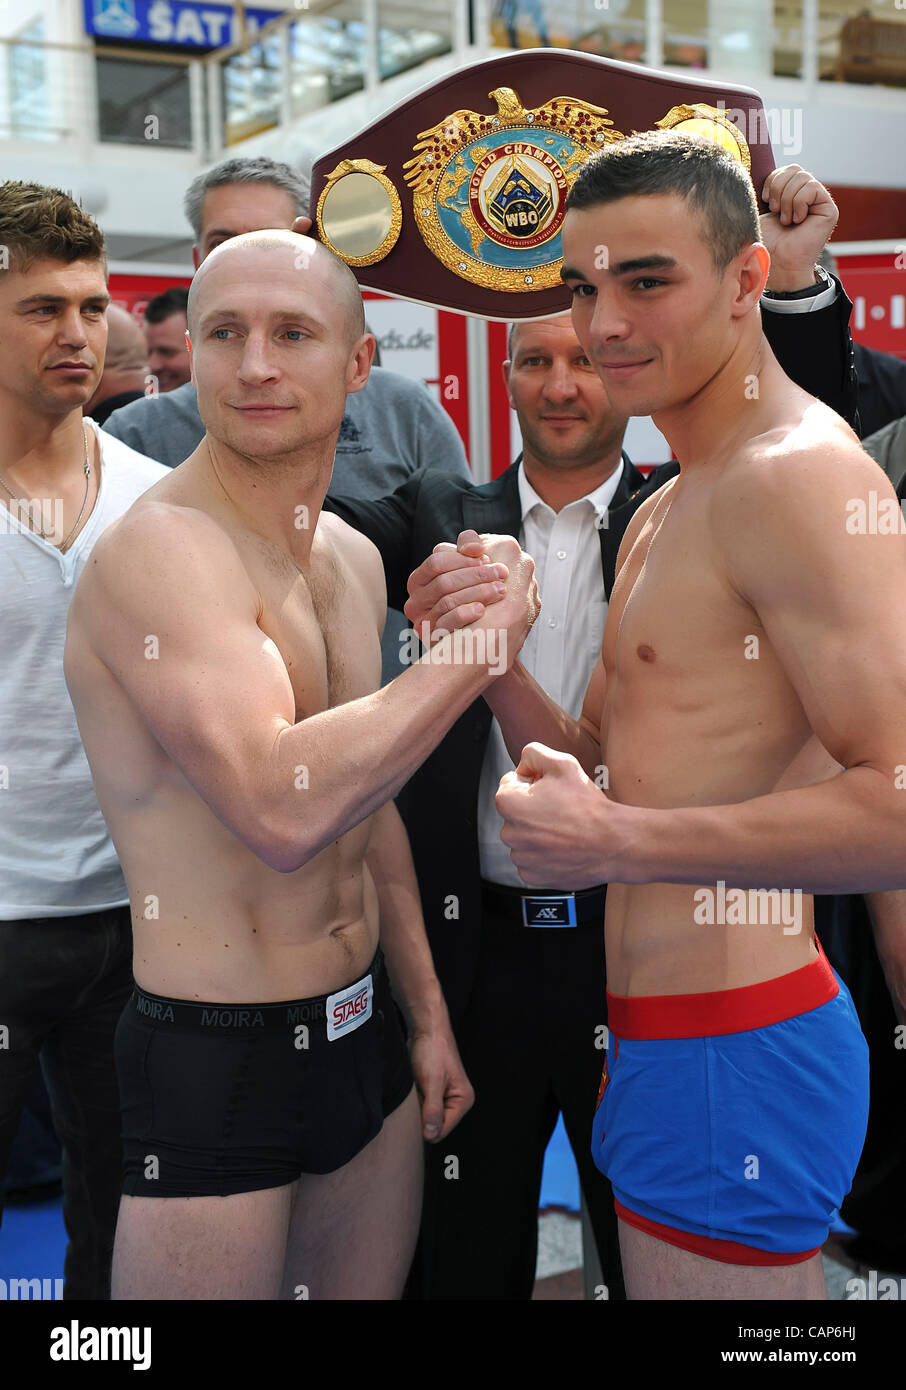 Boxer Lukas Konecny (CZE, left) and Salim Larbi (FRA) pose during the official Weight-In ahead of Interim WBO Light Middleweight Championship Title in Brno Modrice, Czech Republic on April 4, 2012. Konecny's coach Dirk Dzemski stands far left. (CTK Photo/Igor Sefr) Stock Photo